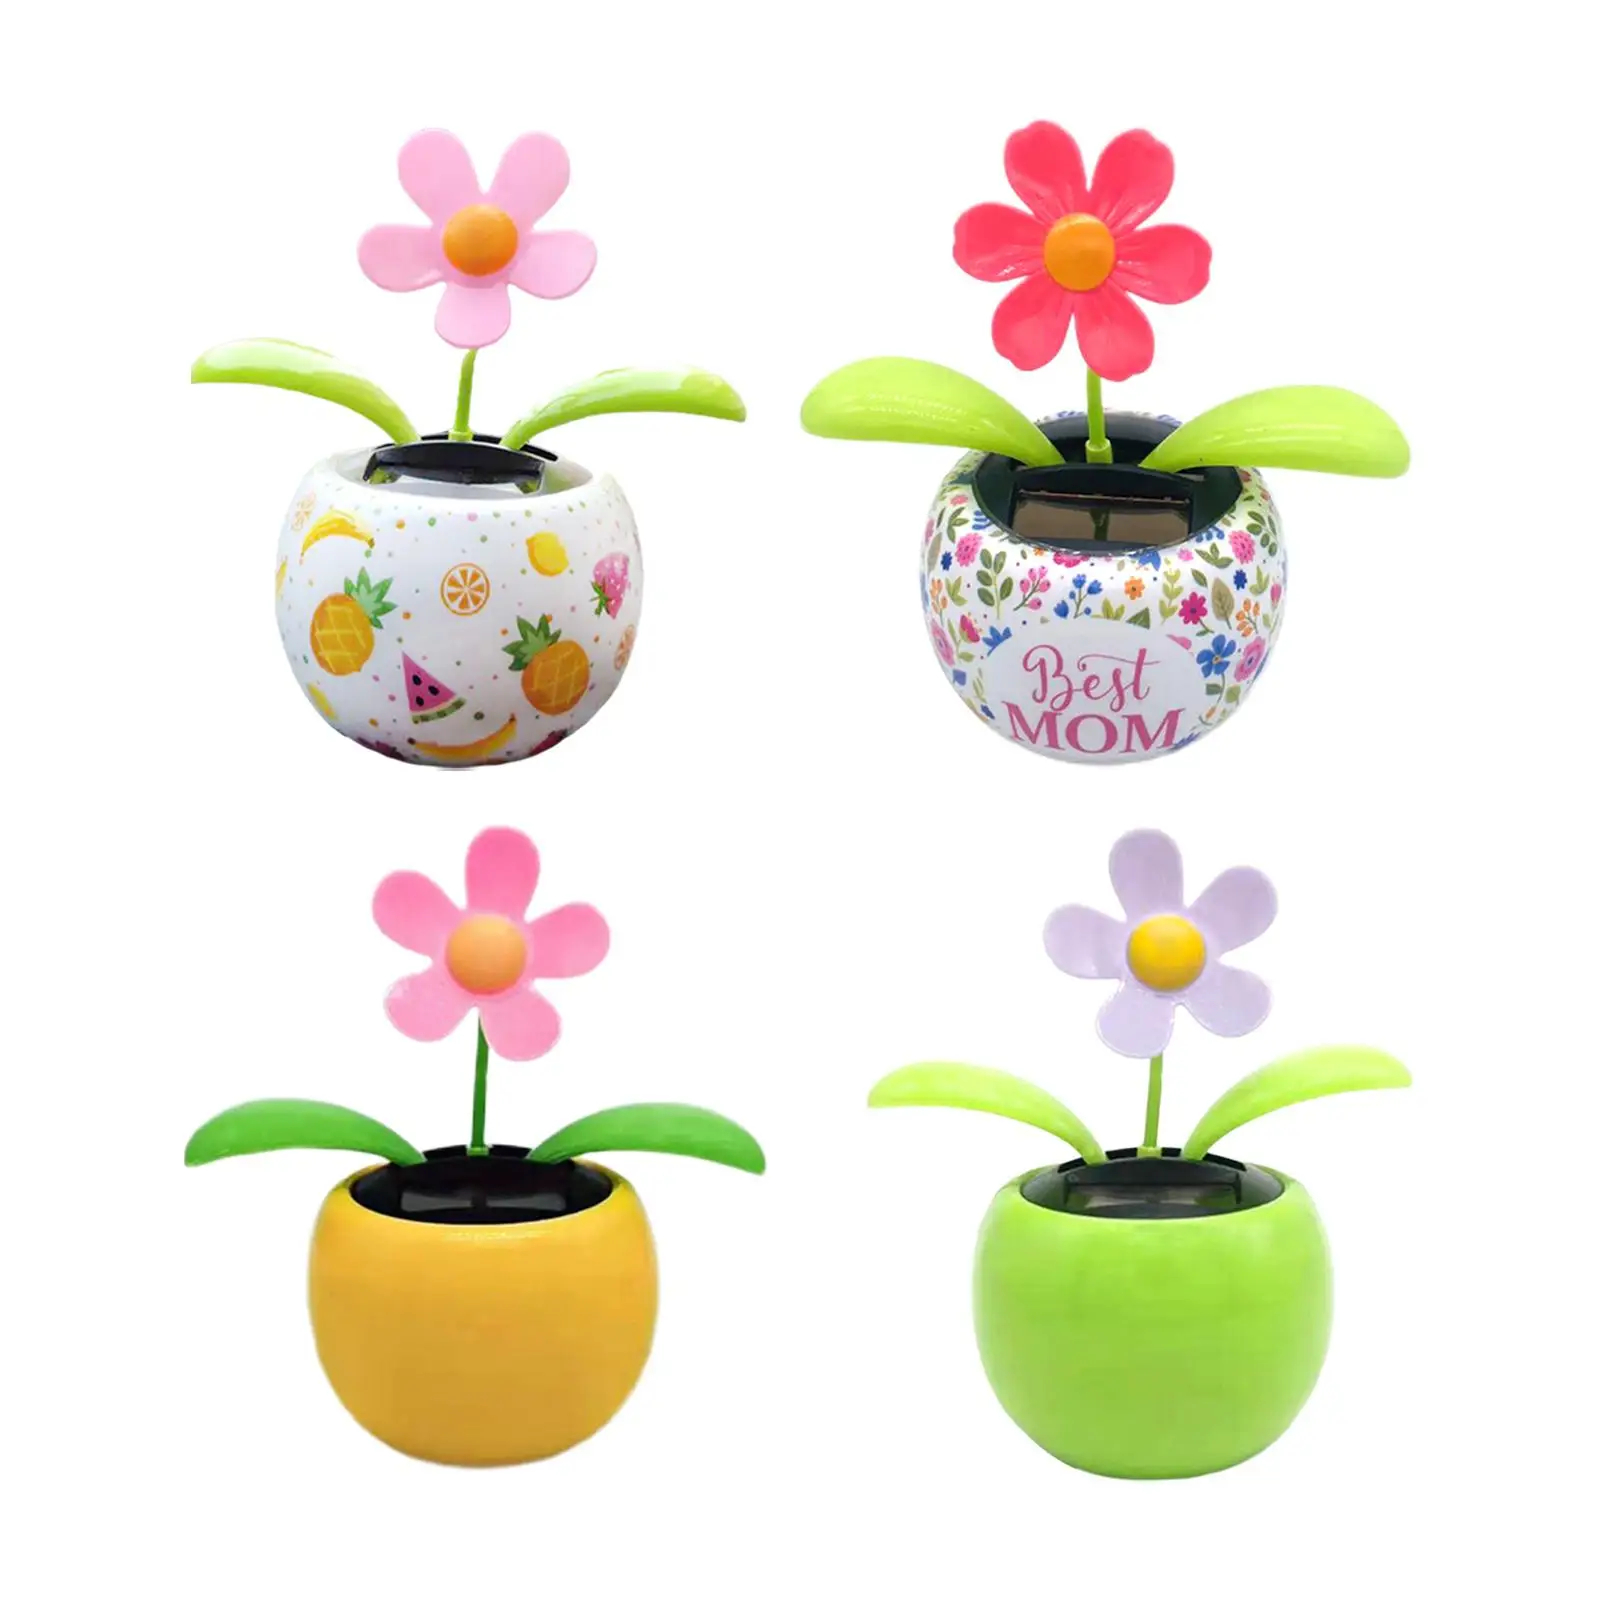 Solar Powered Dancing Flower Dancing Figurines Powered Toy Dancing Flower for Home Car Dashboard Kids Children Decor Baby